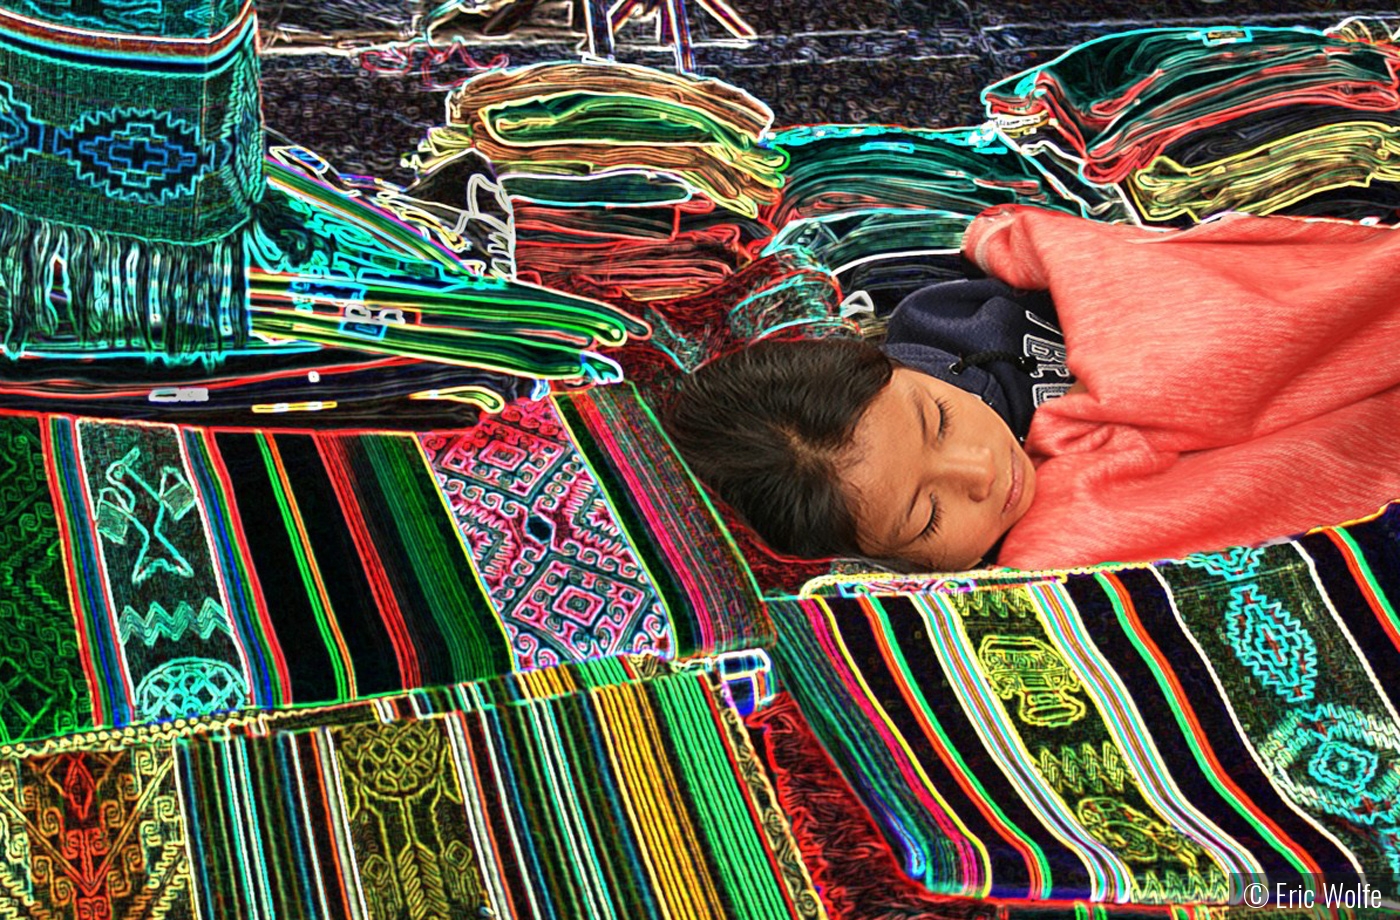 Tucked-in Dreamer at Ecuadorian Market by Eric Wolfe